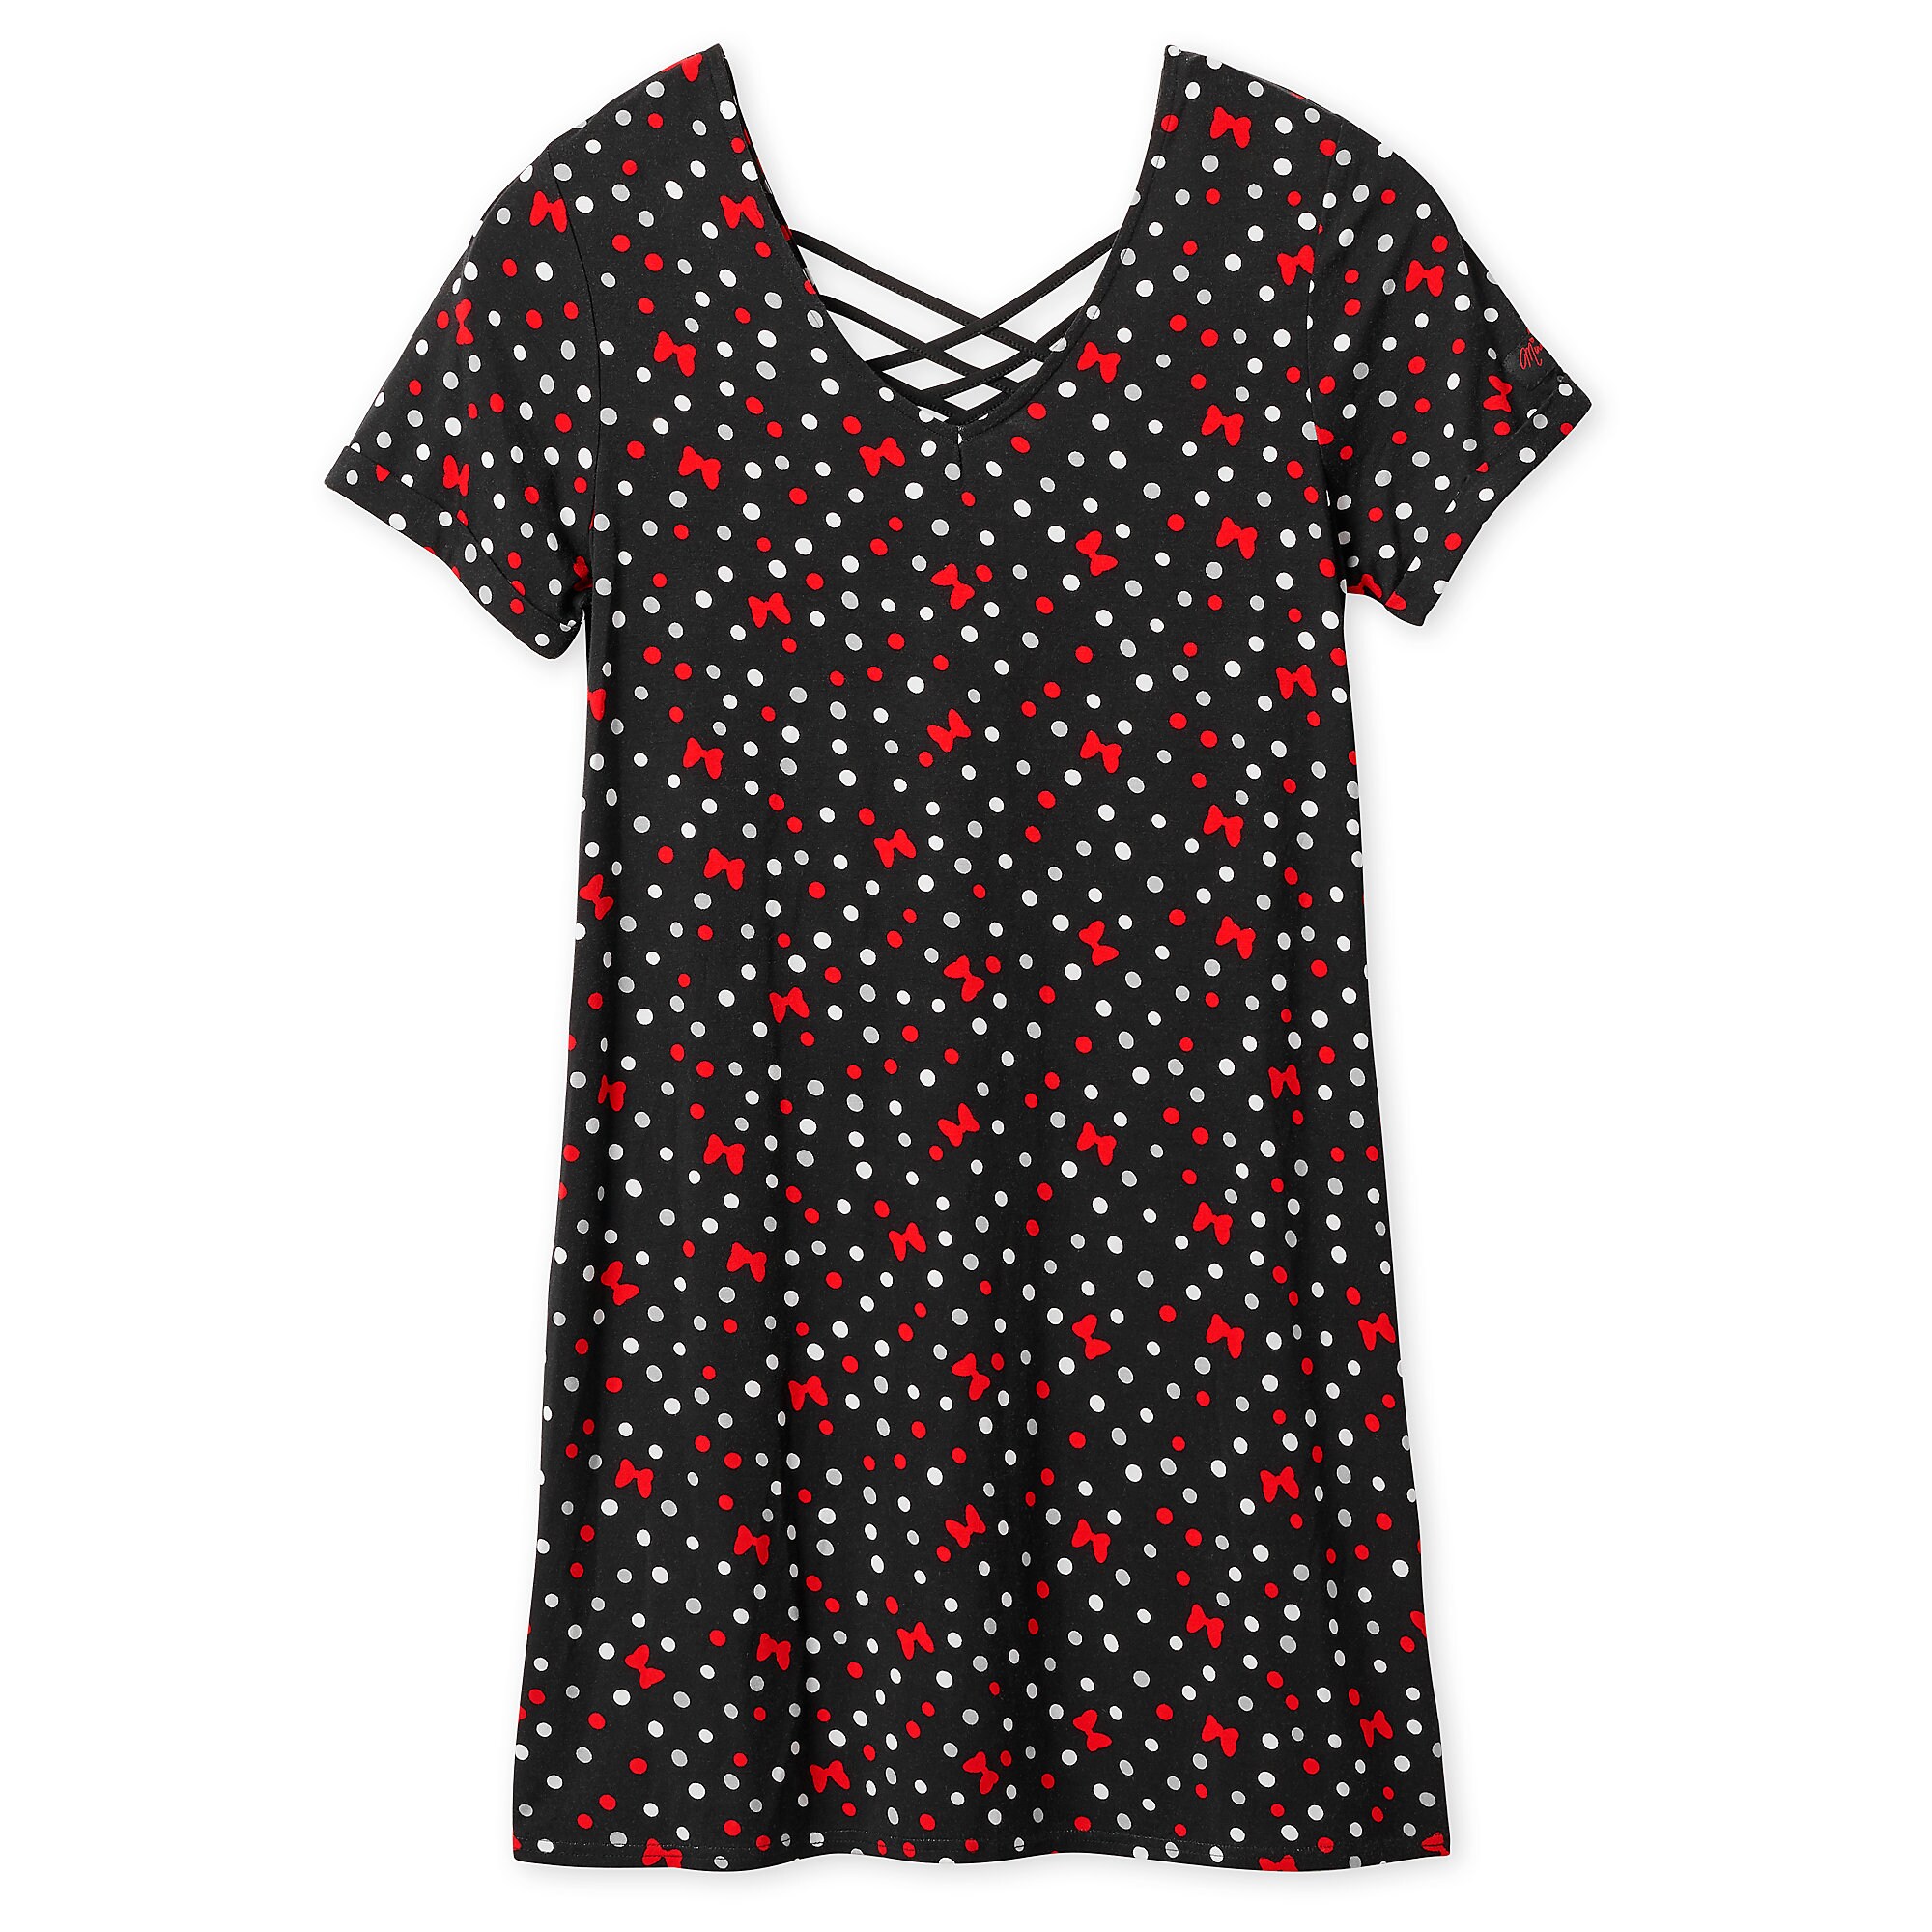 Minnie Mouse Dress for Women